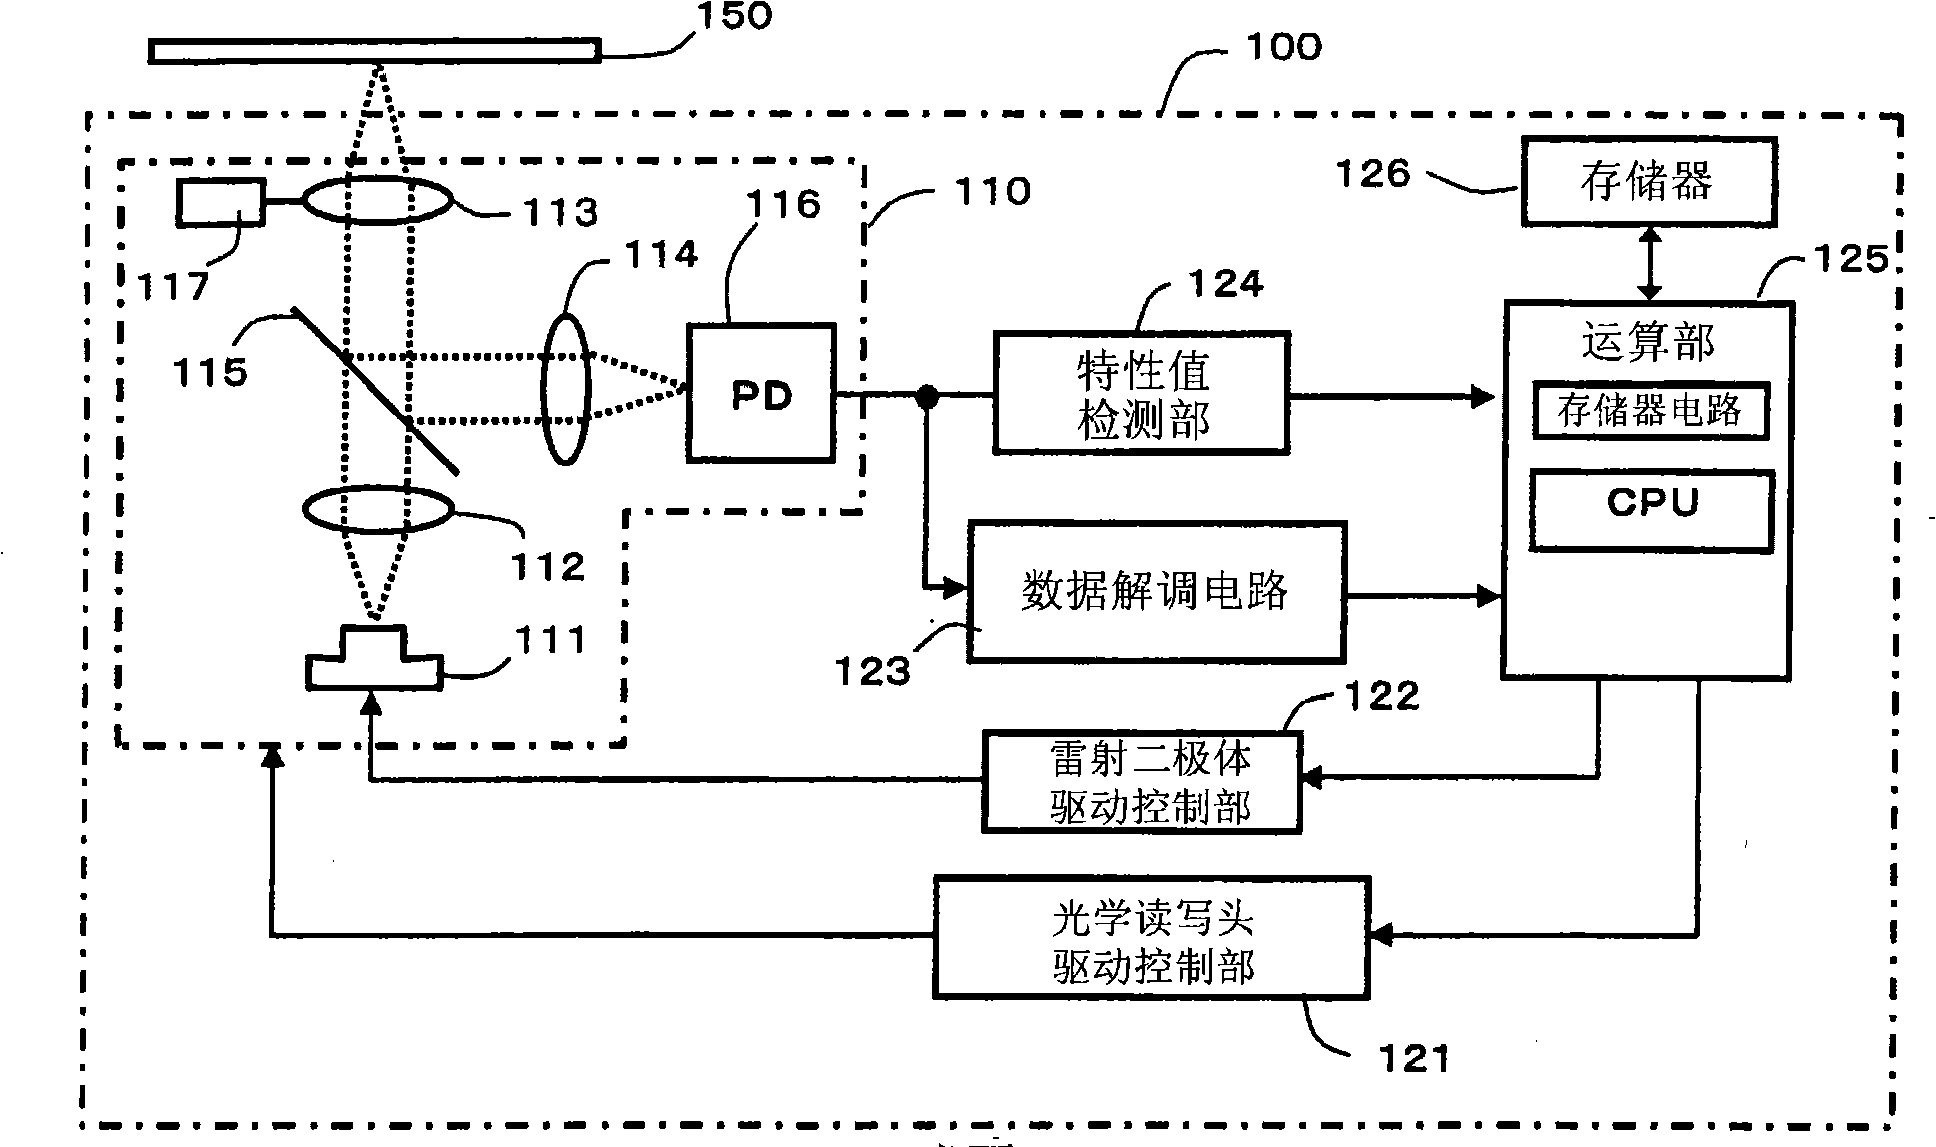 Optical-information reproducing system